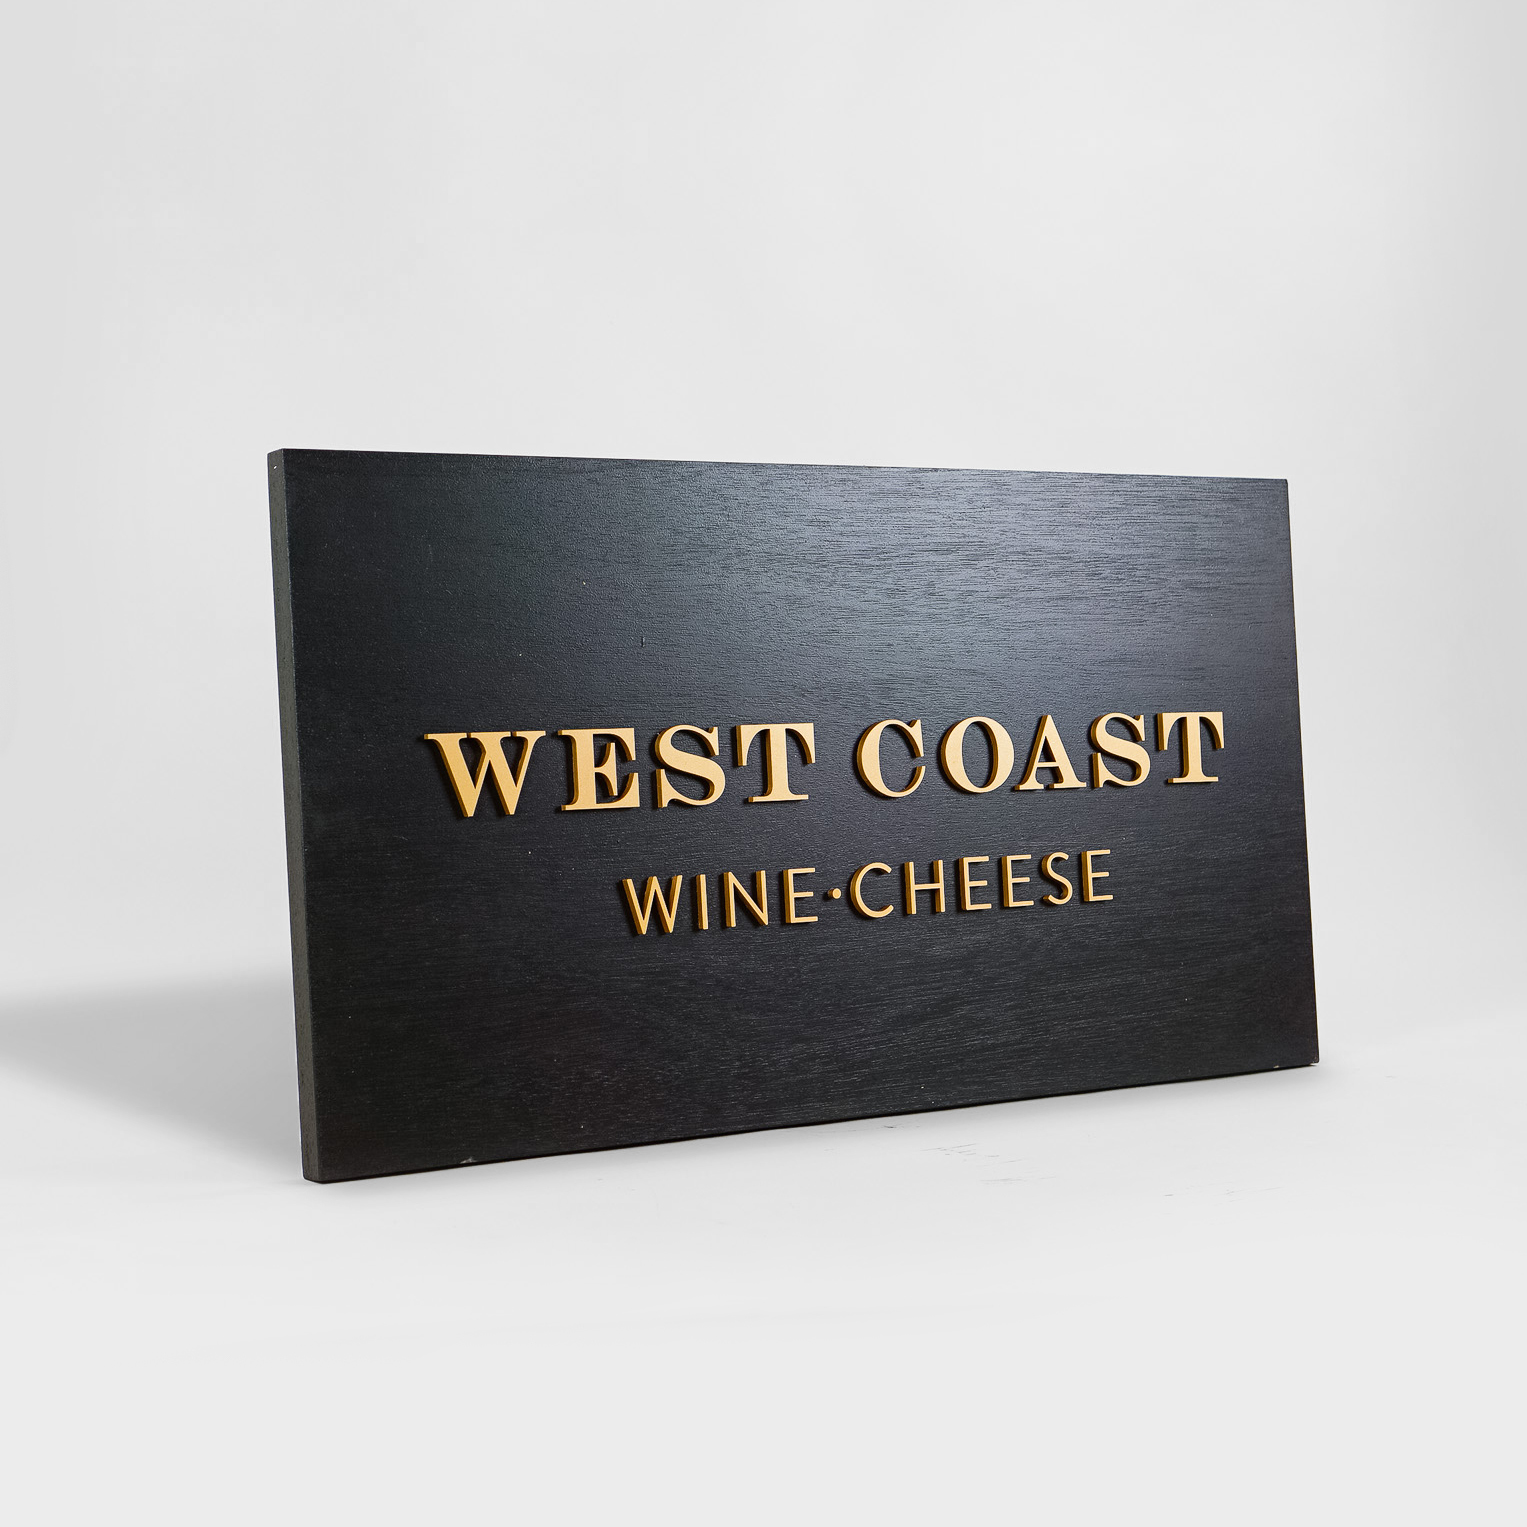 Outdoor hanging sign for West Coast Wine and Cheese, a San Francisco based bar and gastropub.